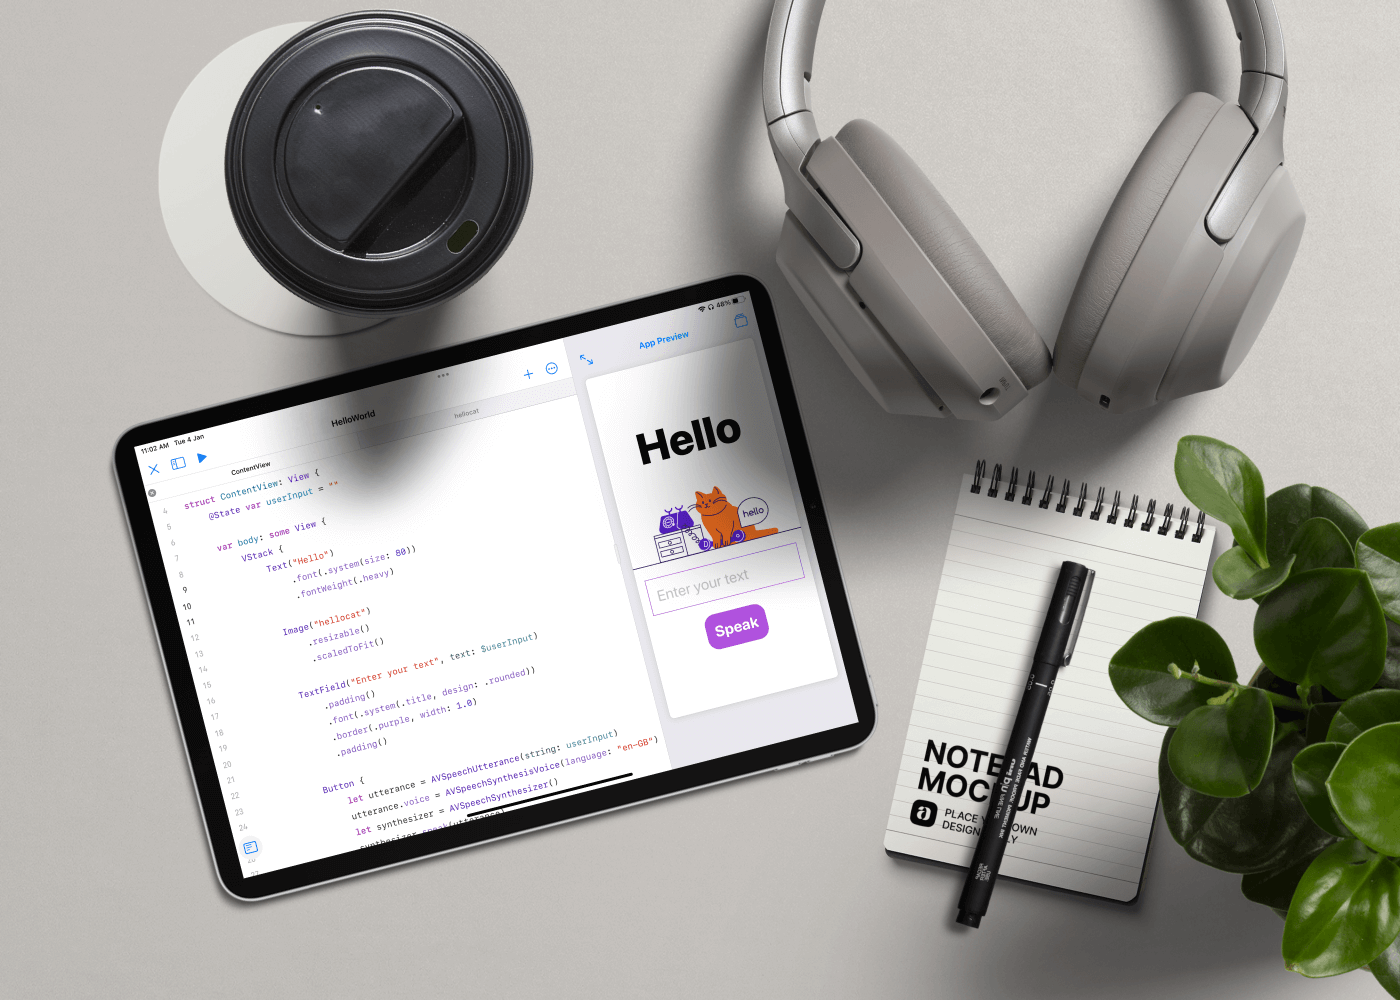 Swift Playgrounds 4 now available - Latest News - Apple Developer